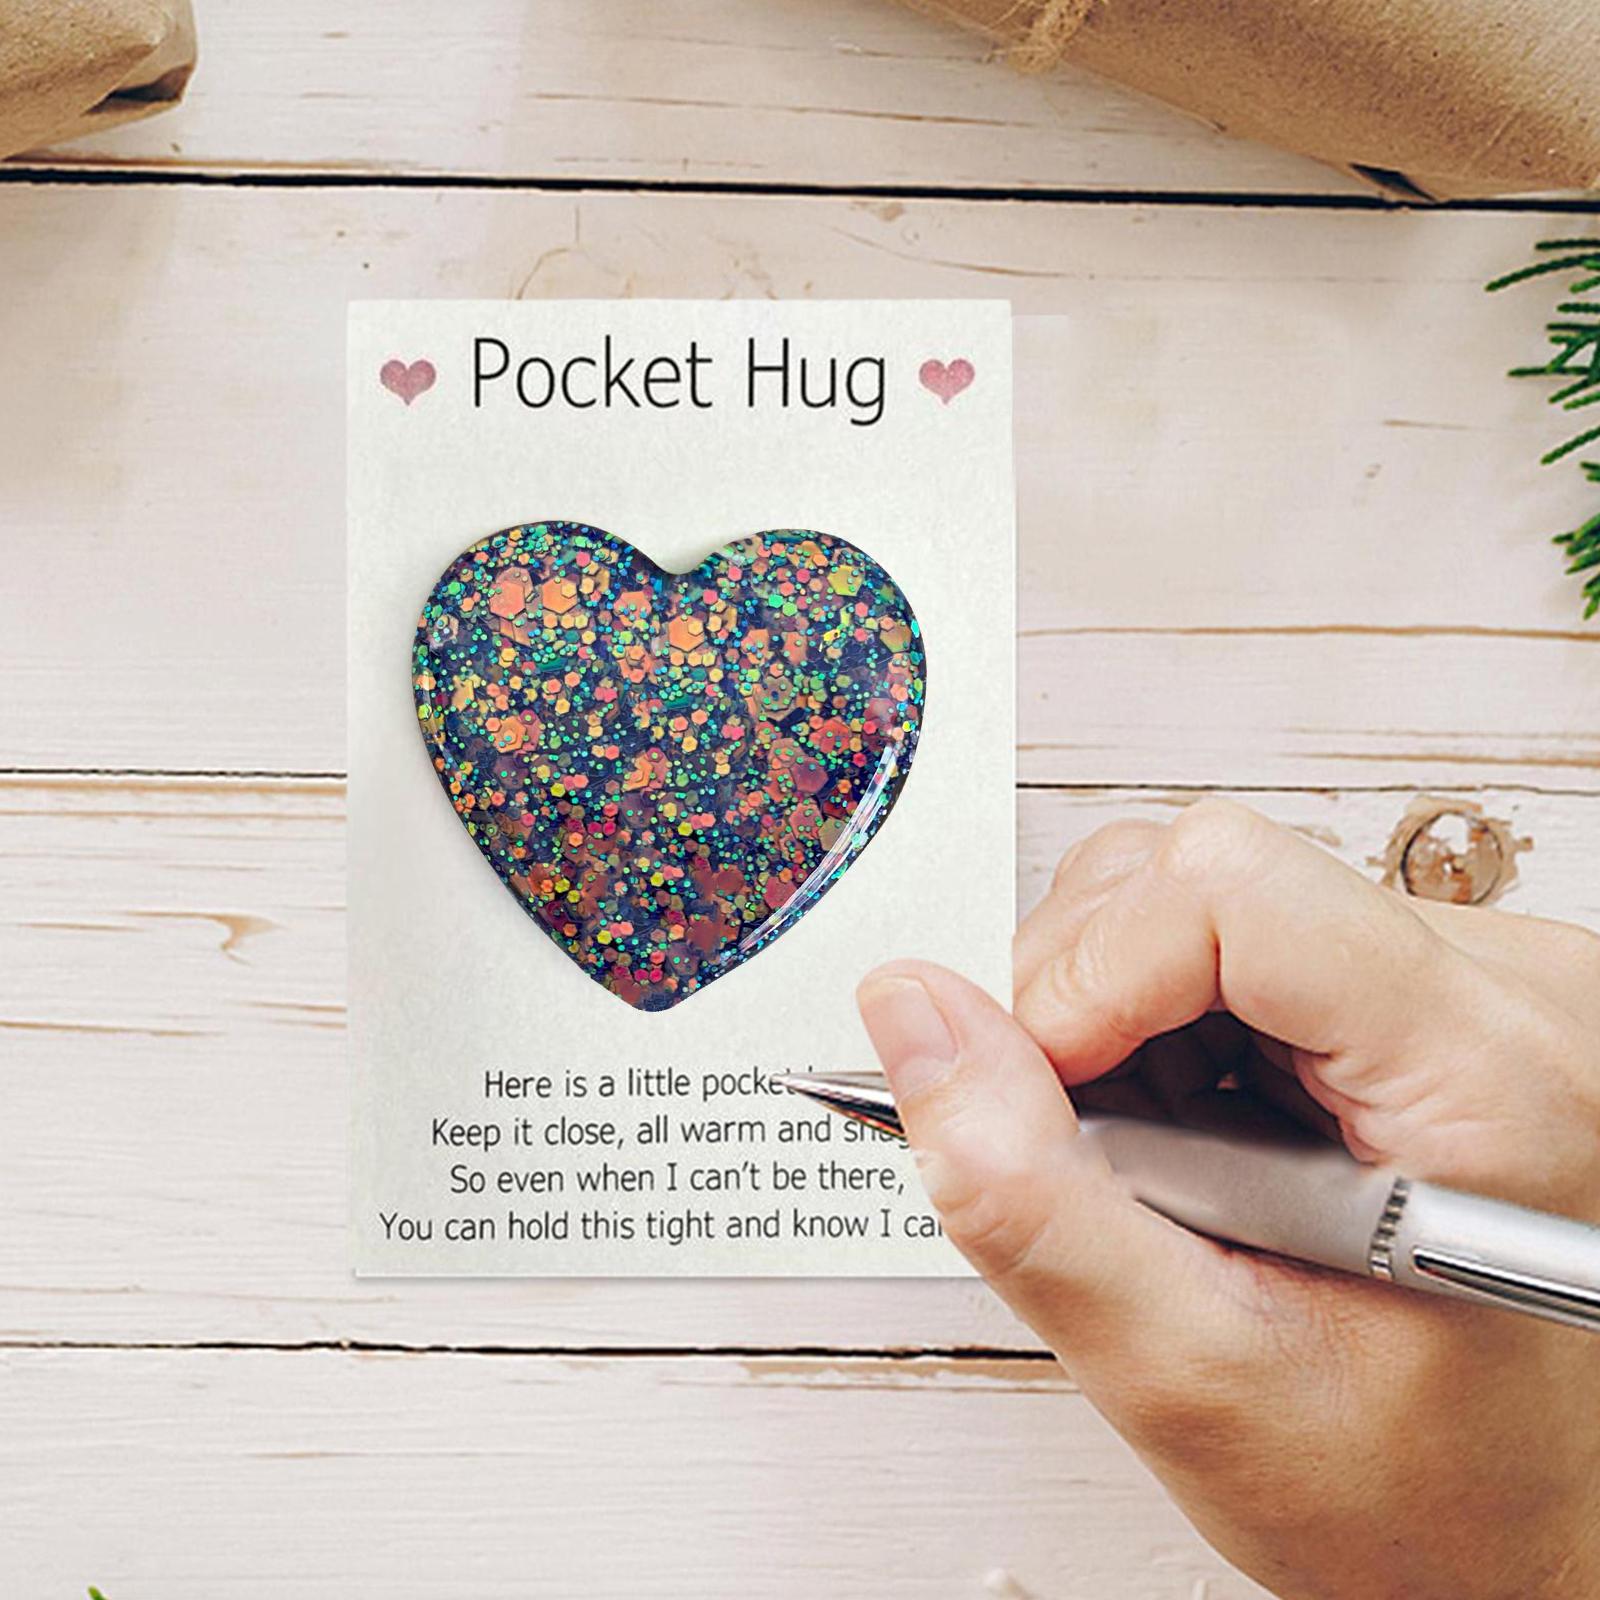 Pocket Hug Heart Token with Greeting Card Mini Cute Pocket Hug Decoration Keepsake Cheer up Gifts for Friends Colleagues Family - image 4 of 5